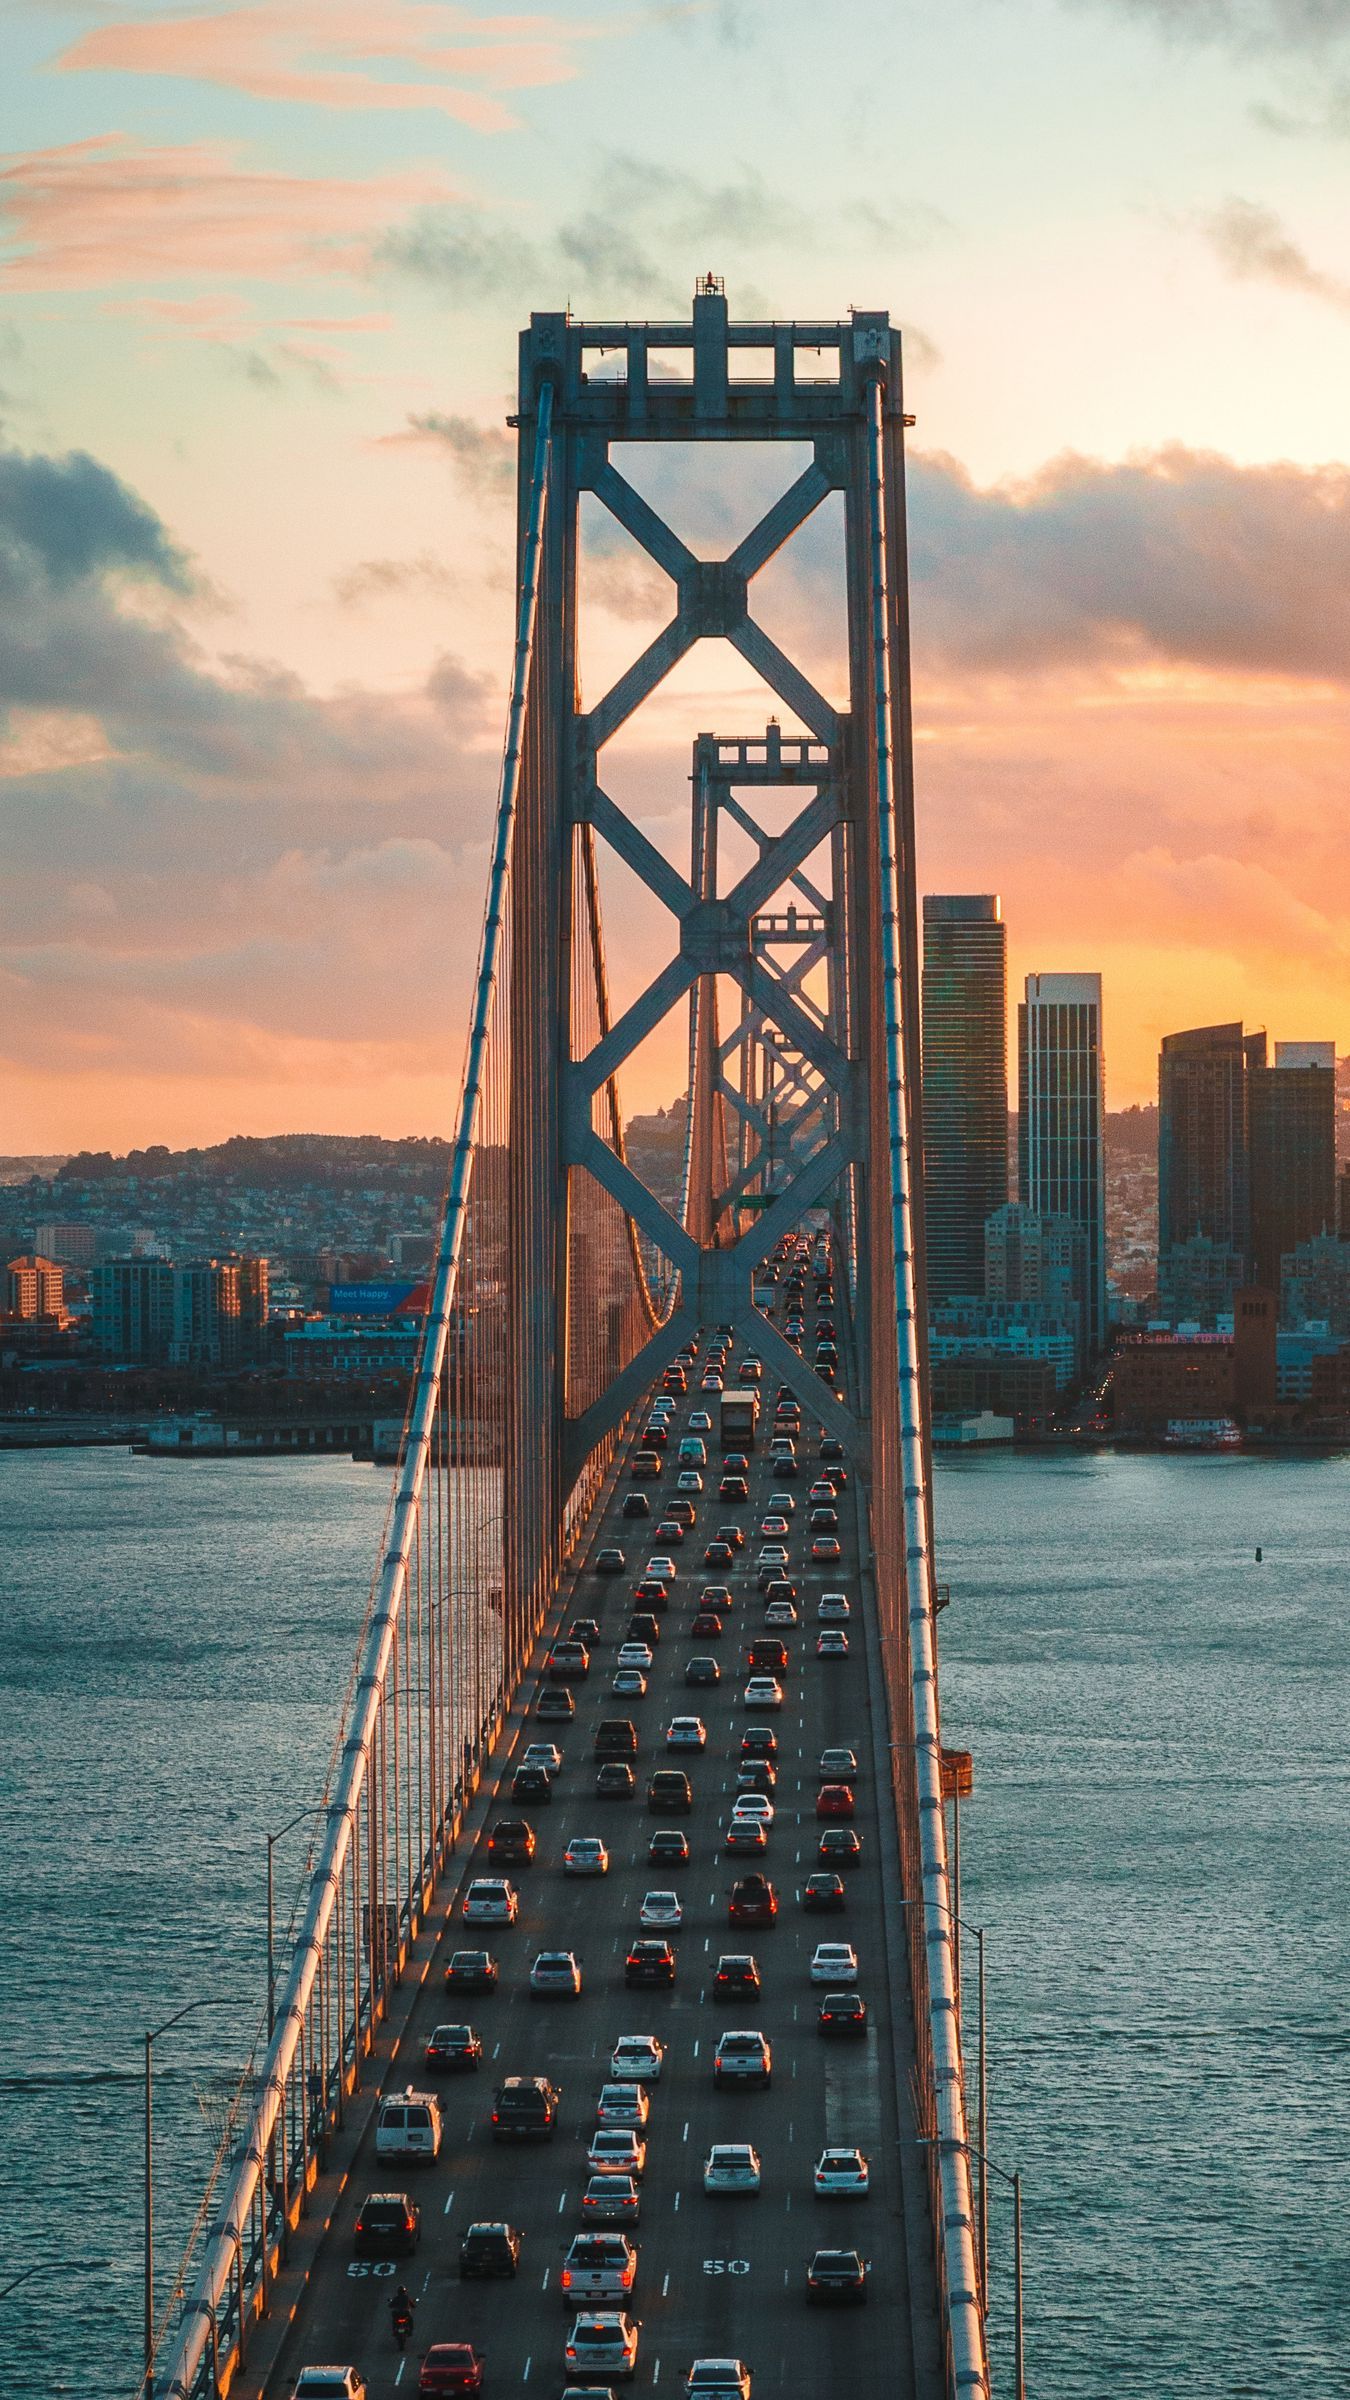 Download wallpaper 1350x2400 bridge, traffic, motion, sunset, city, san francisco, united states iphone 8+/7+/6s+/for parallax HD background